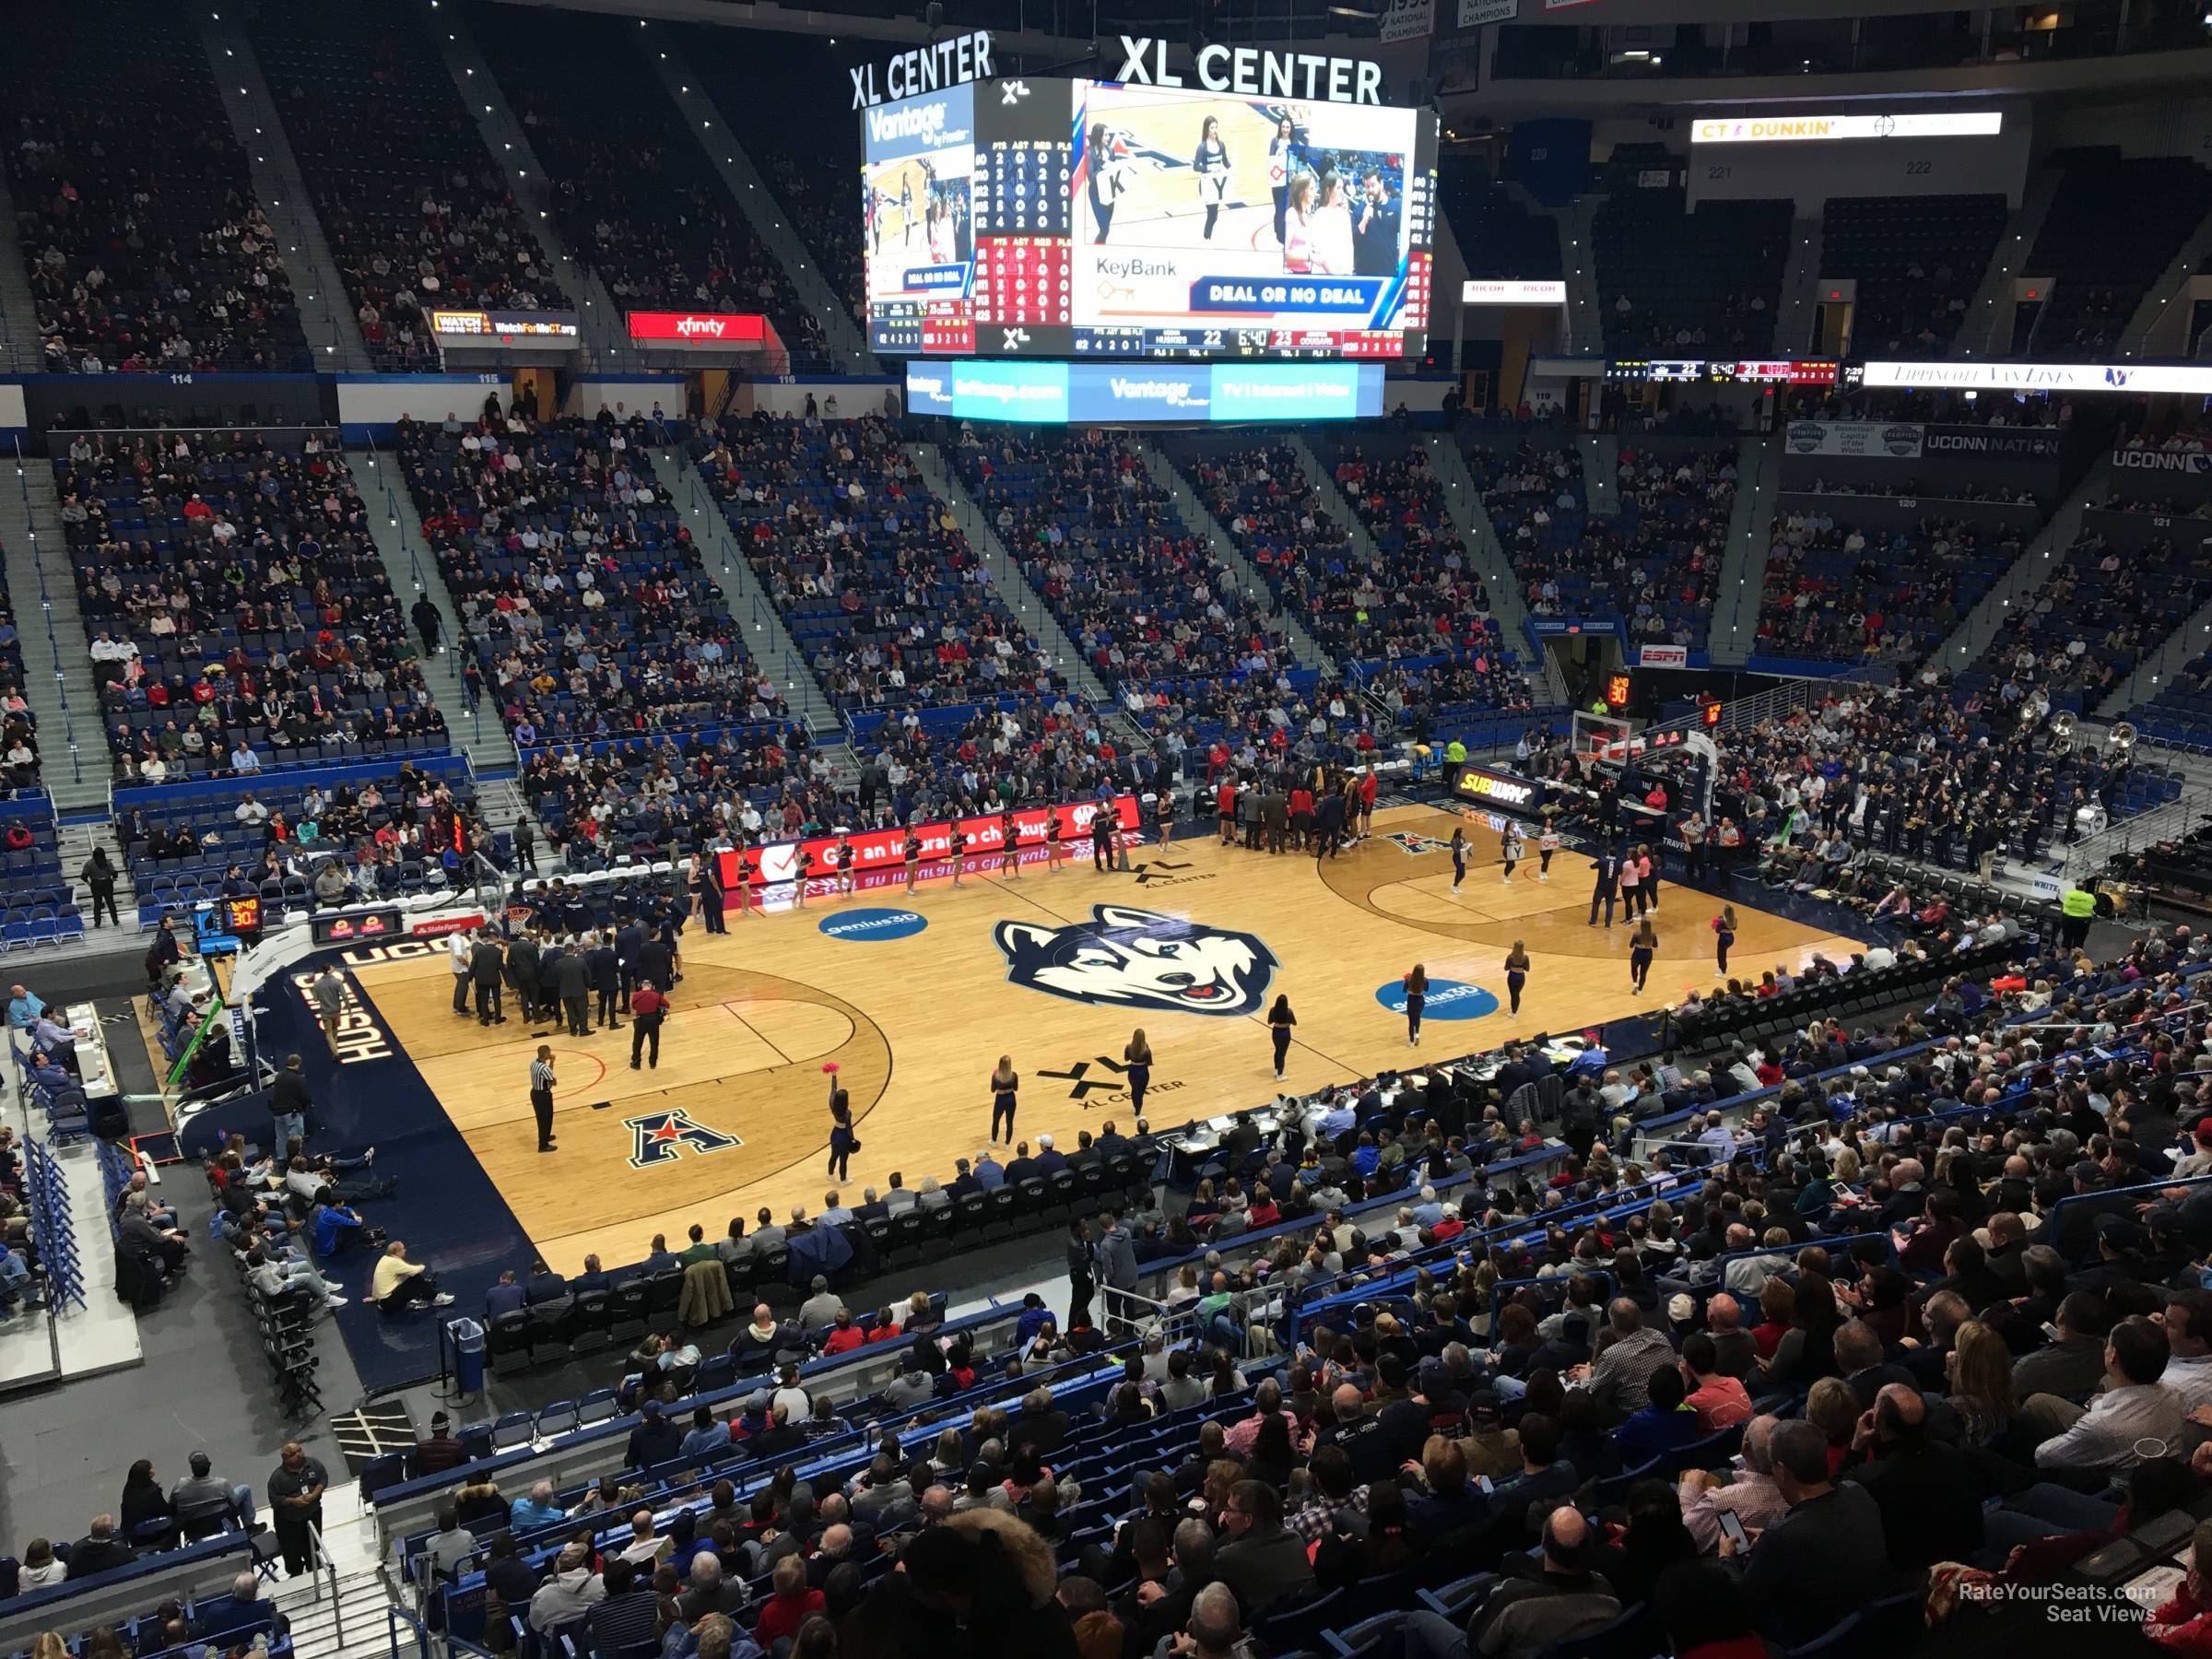 section 205, row a seat view  - xl center